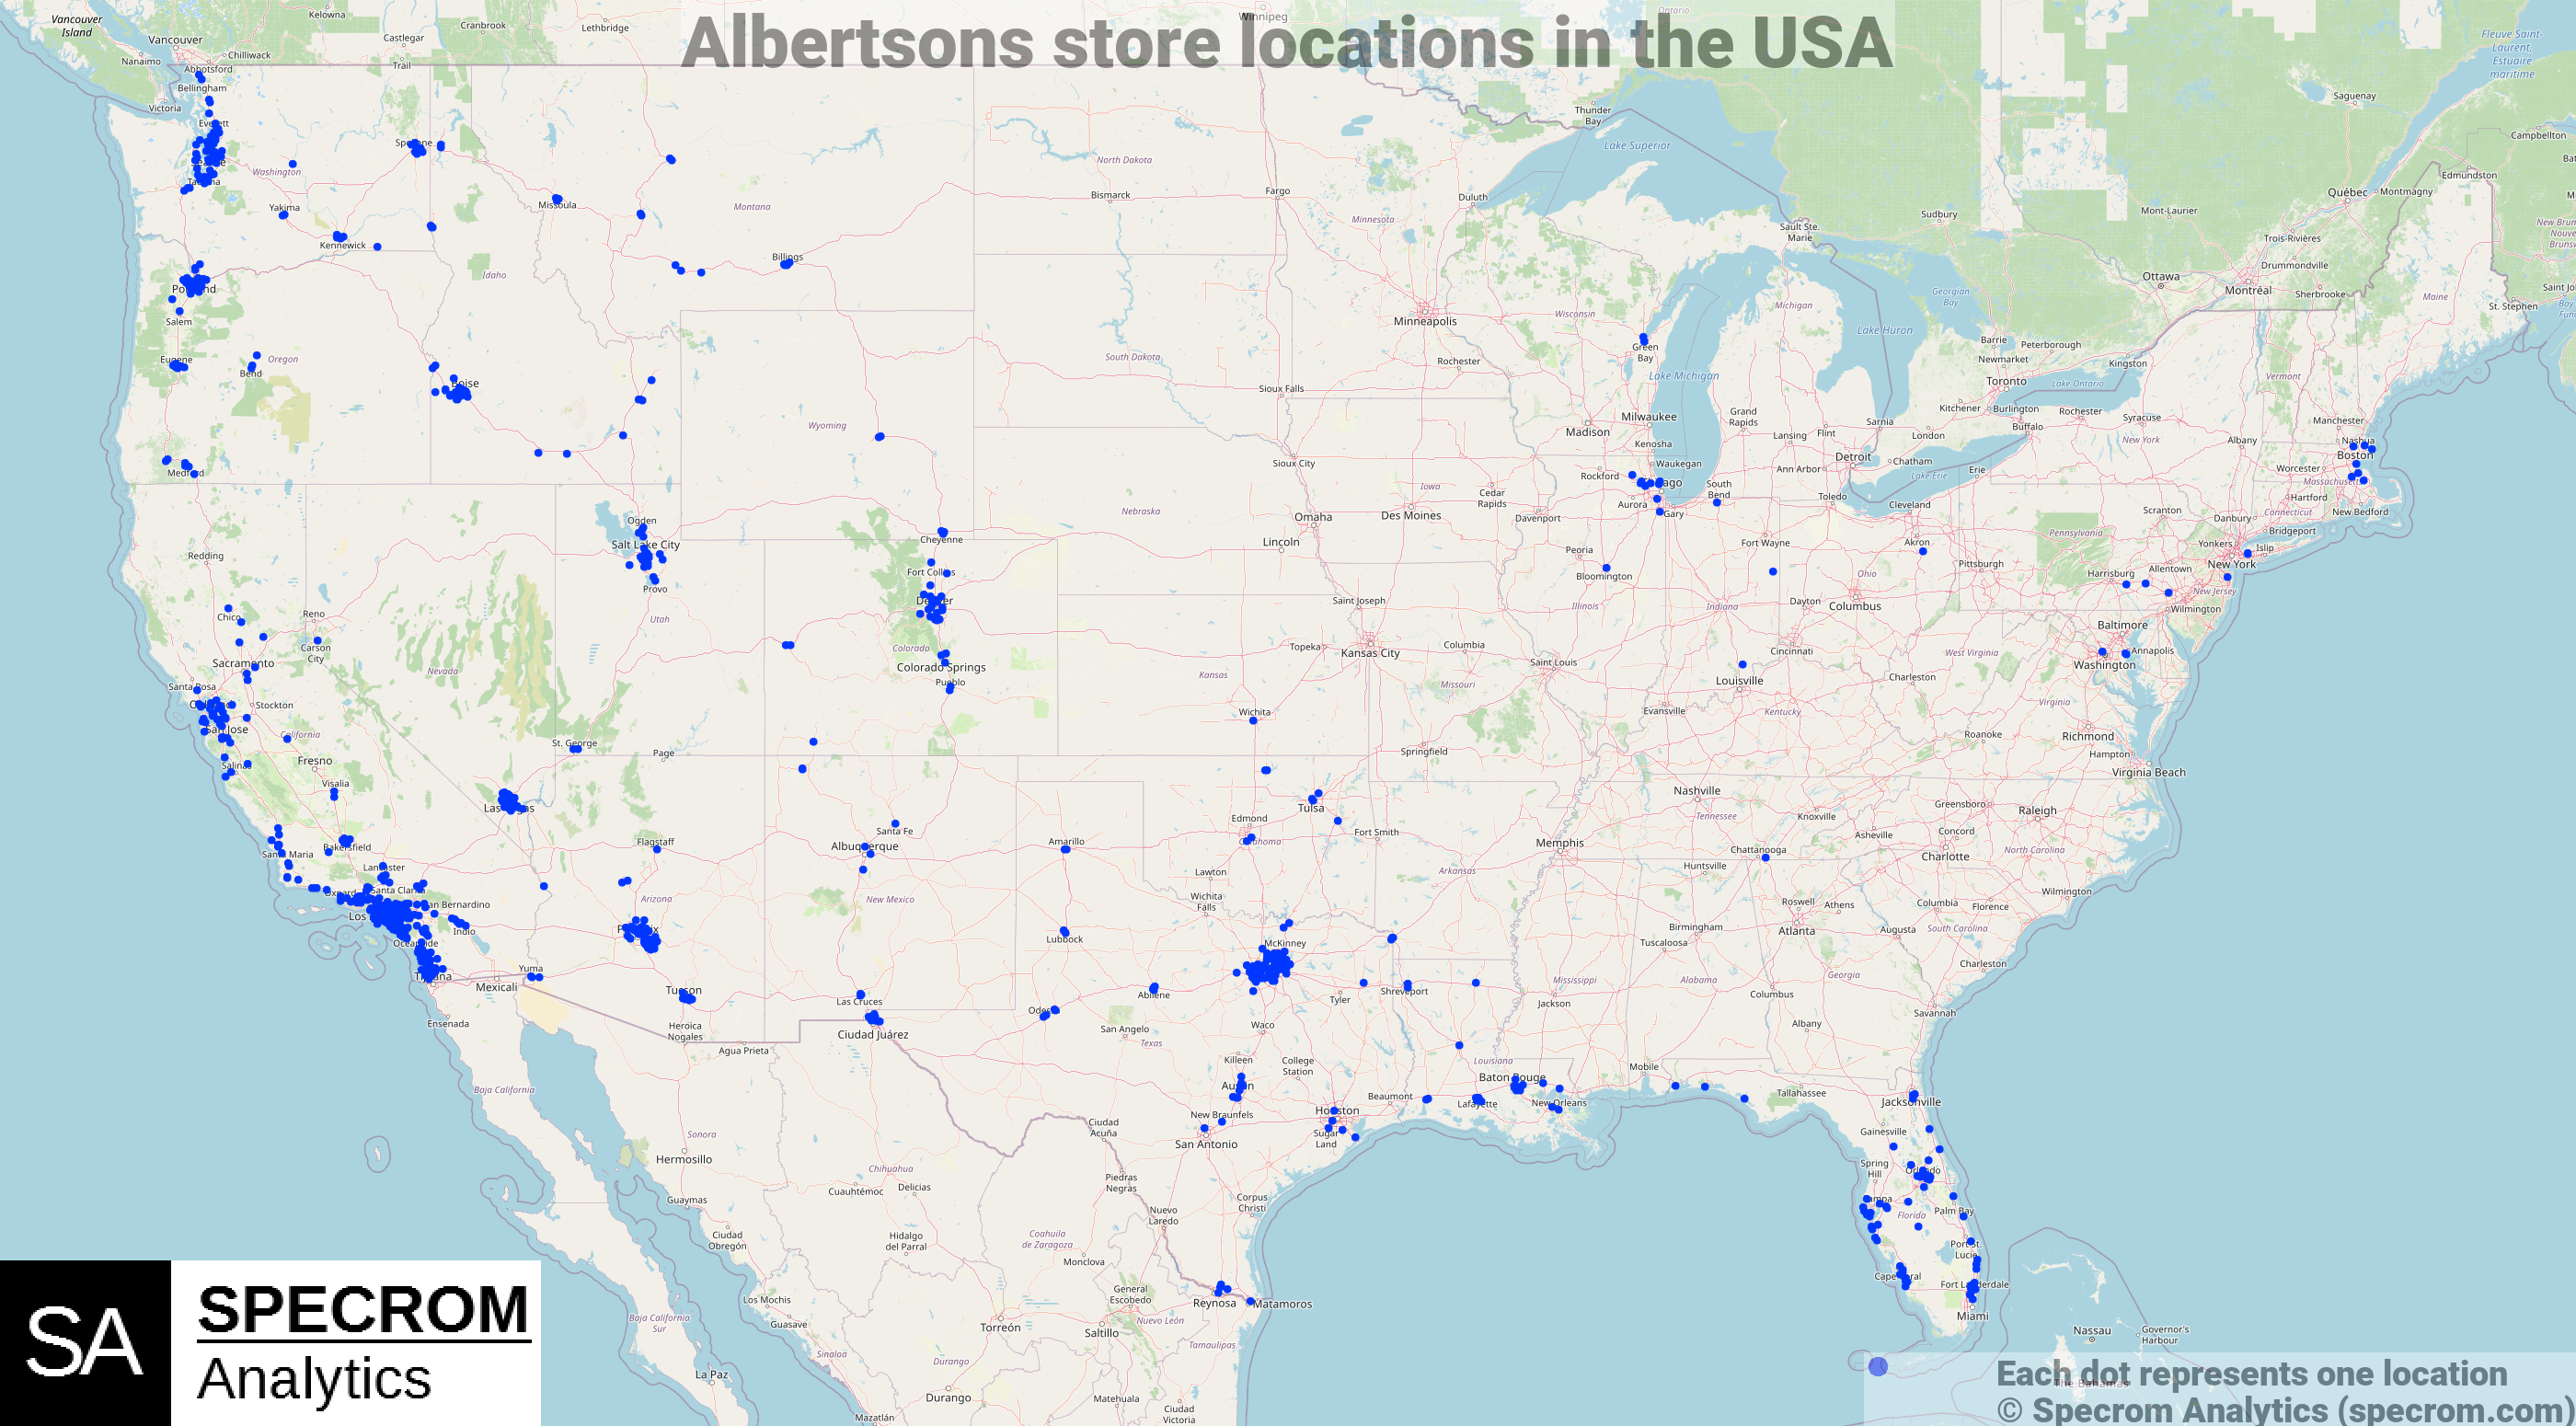 Albertsons store locations in the USA